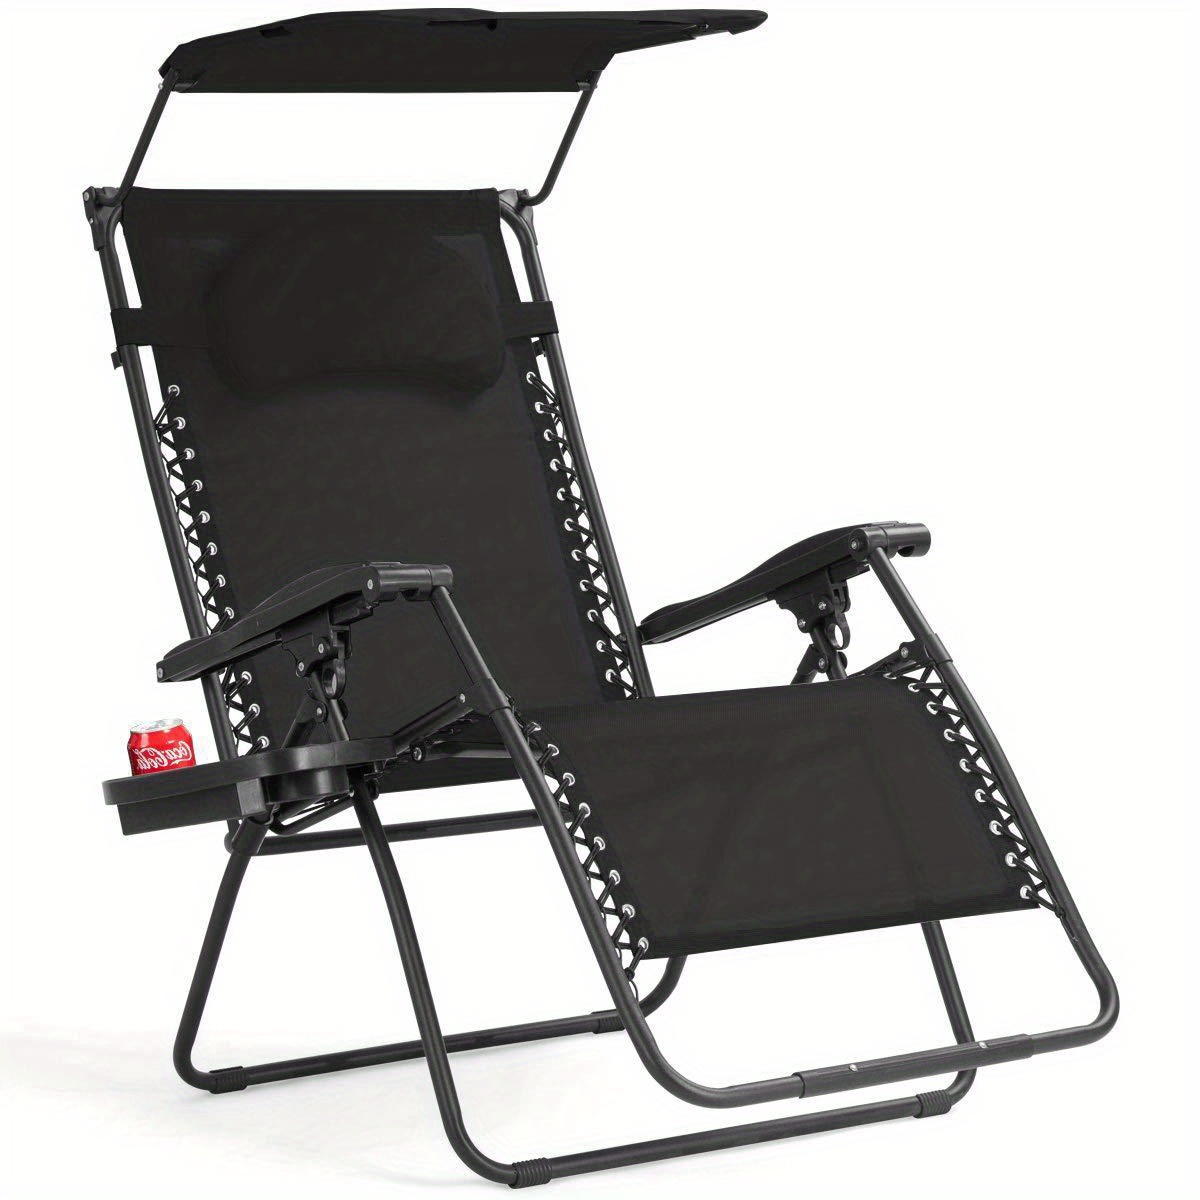 

Homasis Folding Recliner 0 Gravity Lounge Chair W/ Shade Canopy Cup Holder Black